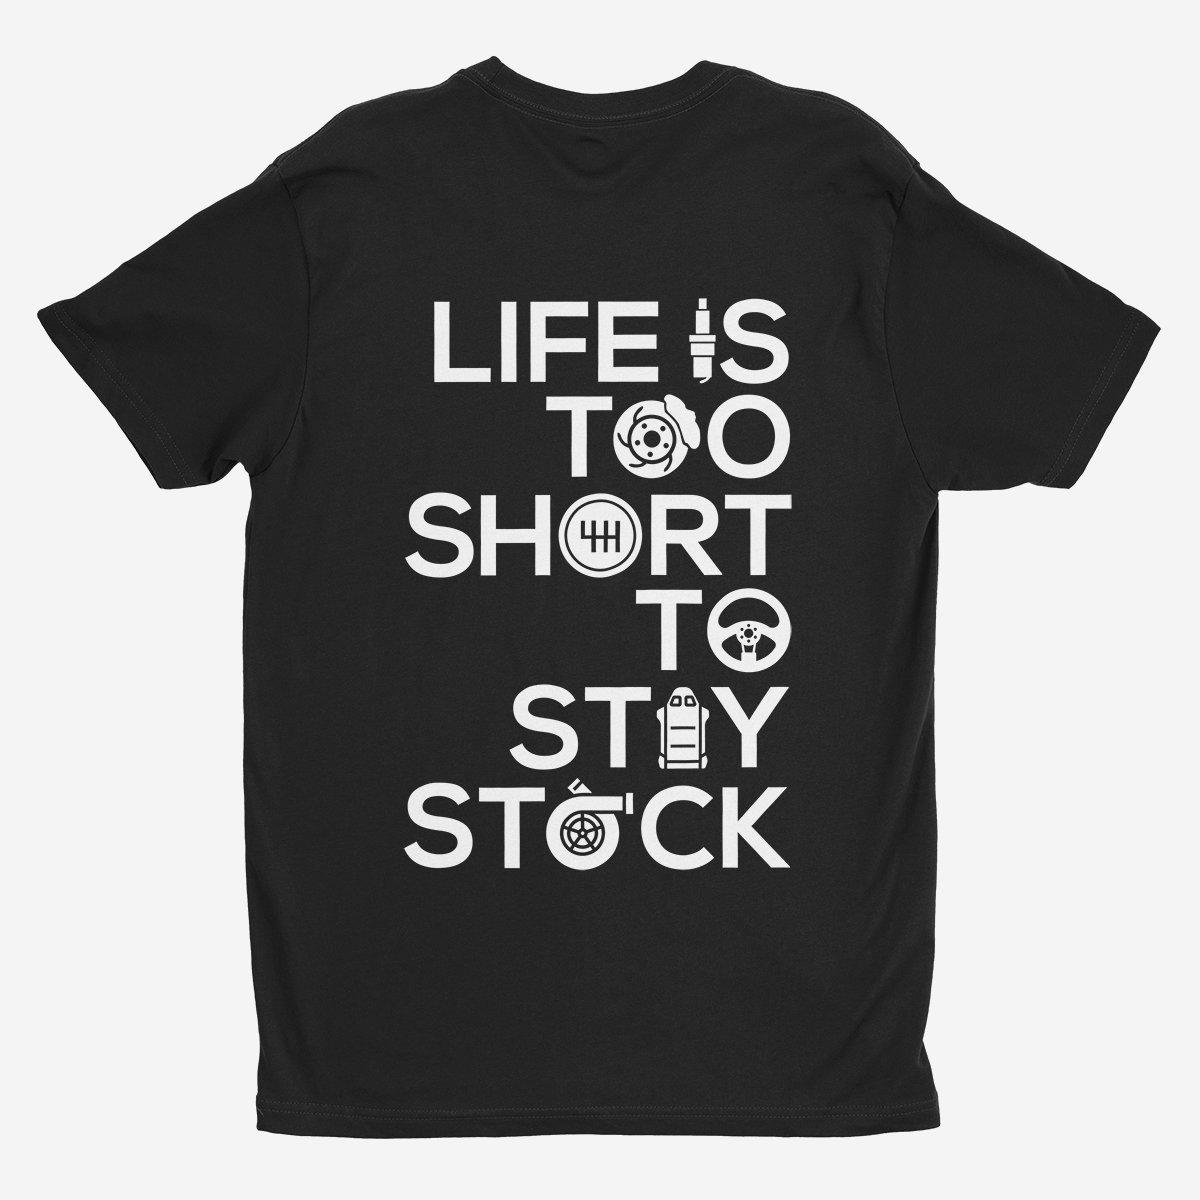 Life Is Too Short To Stay Stock - Car T-Shirt - Black.